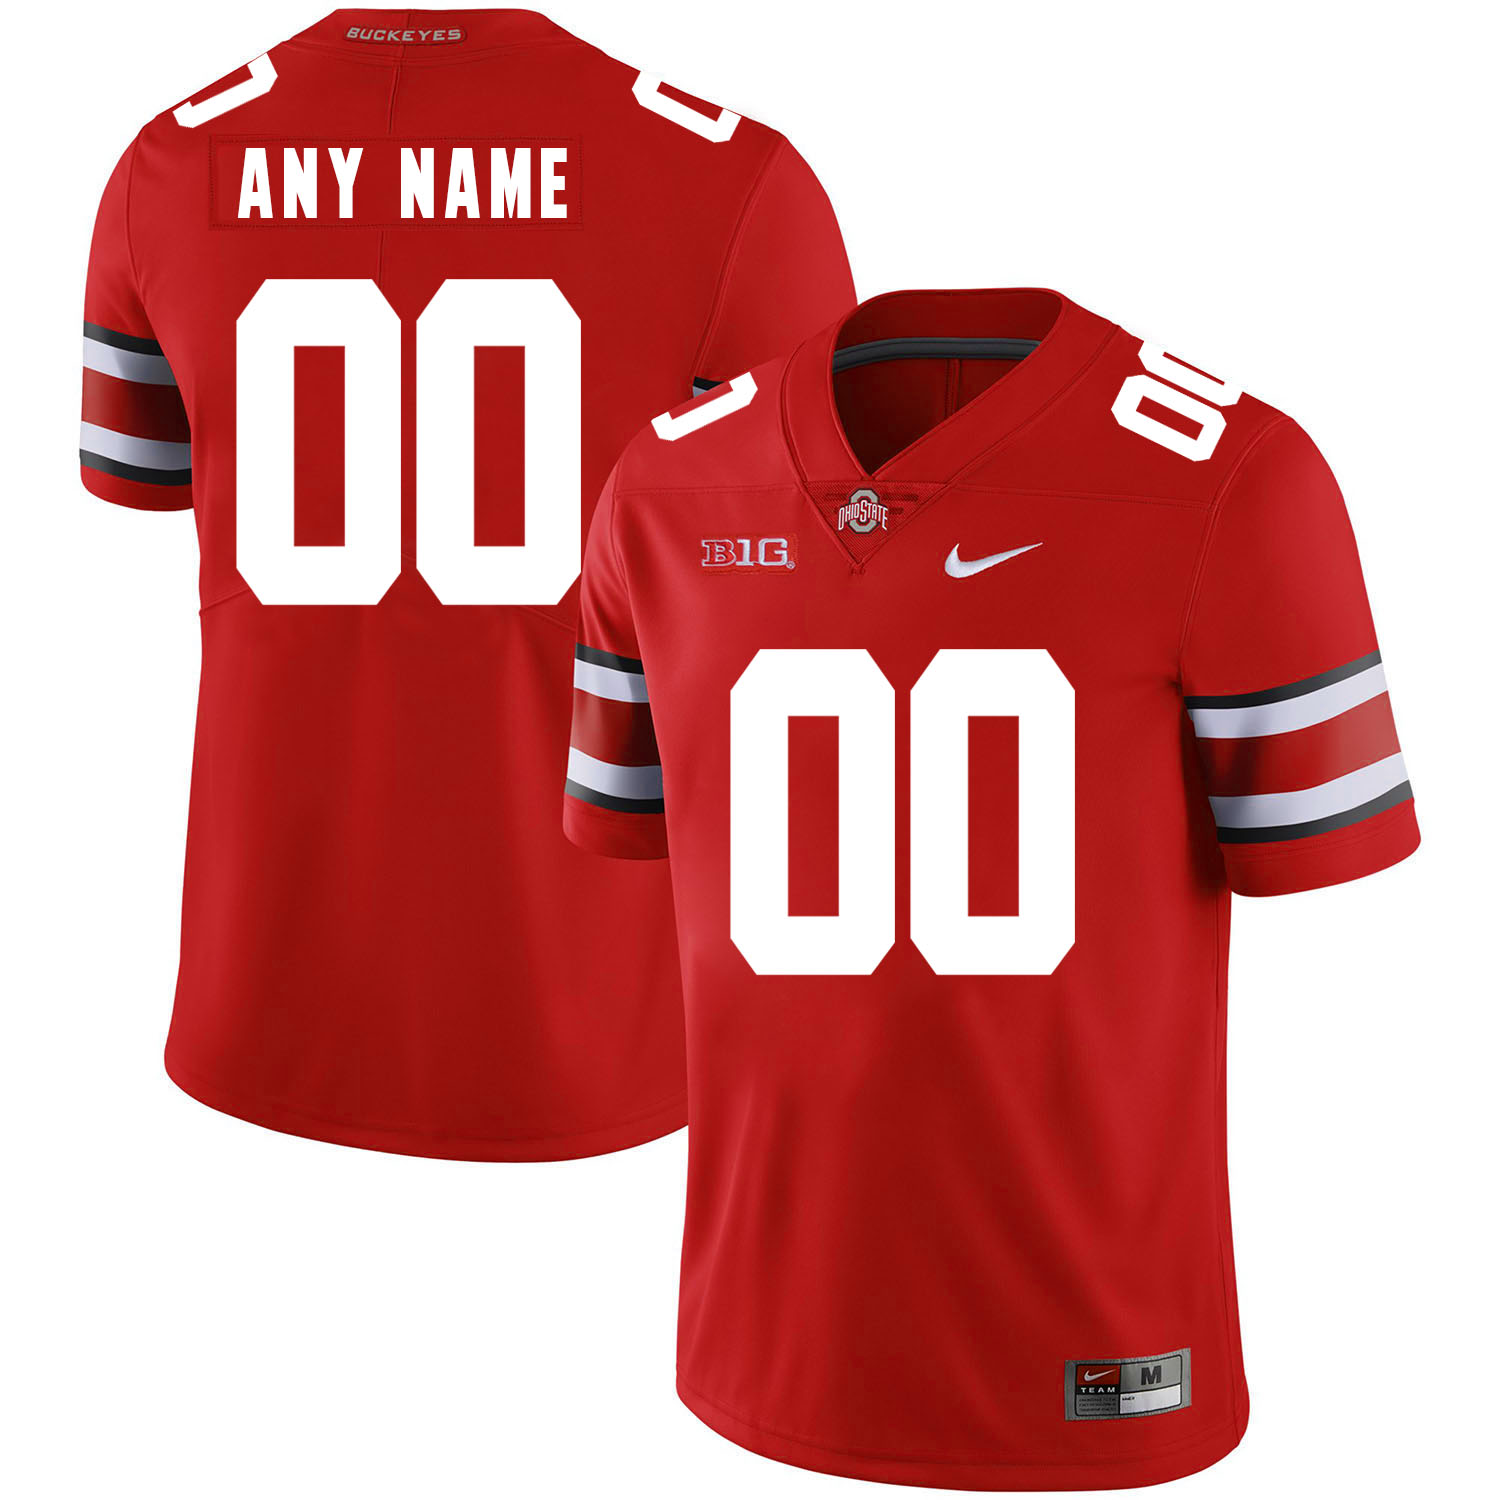 Ohio State Buckeyes Red Men's Customized Nike College Football Jersey